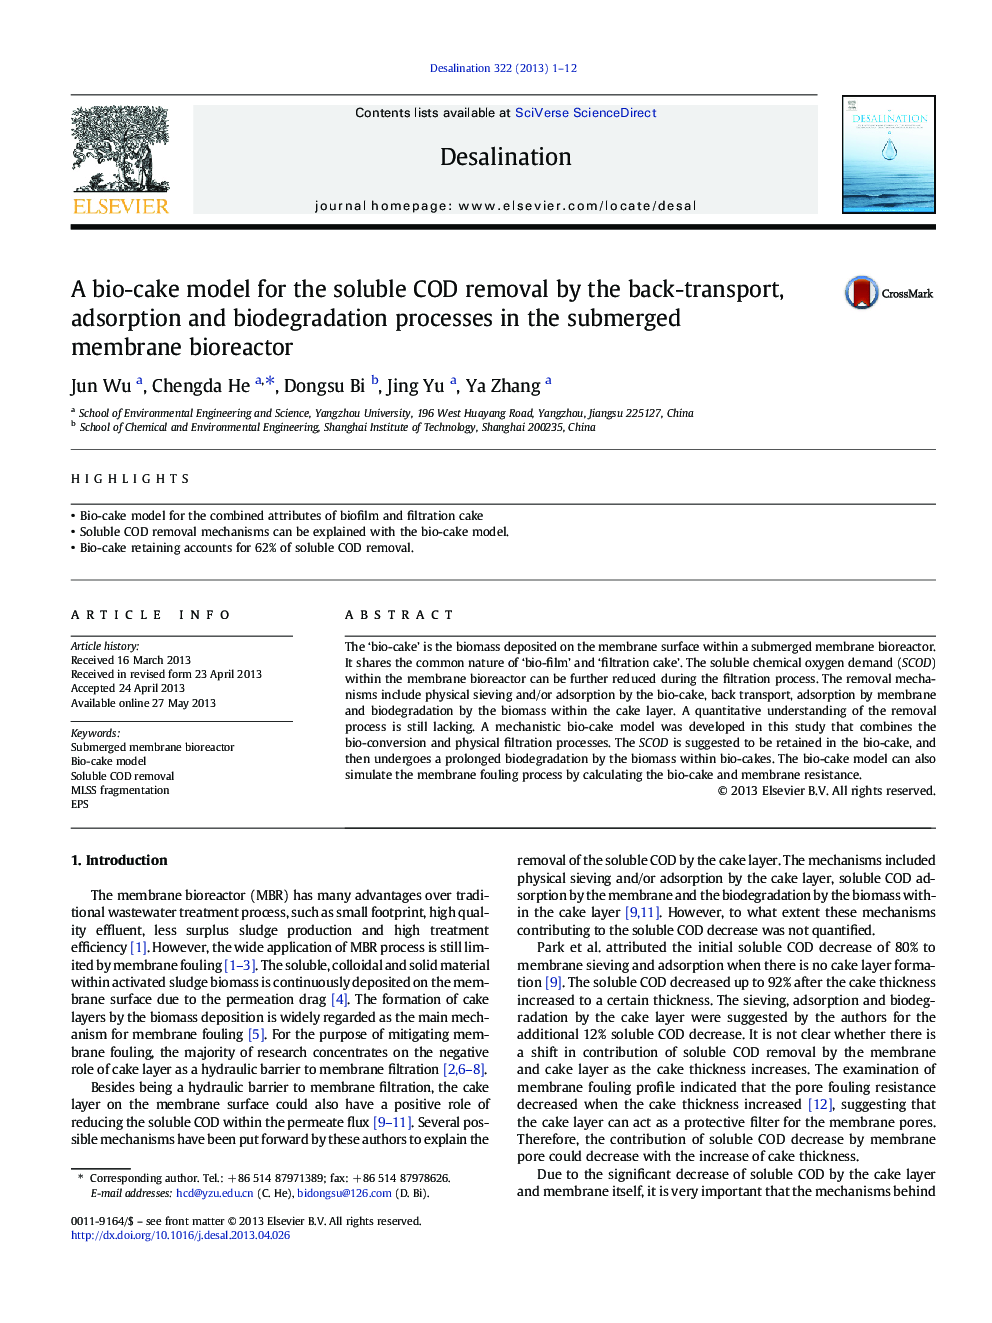 A bio-cake model for the soluble COD removal by the back-transport, adsorption and biodegradation processes in the submerged membrane bioreactor